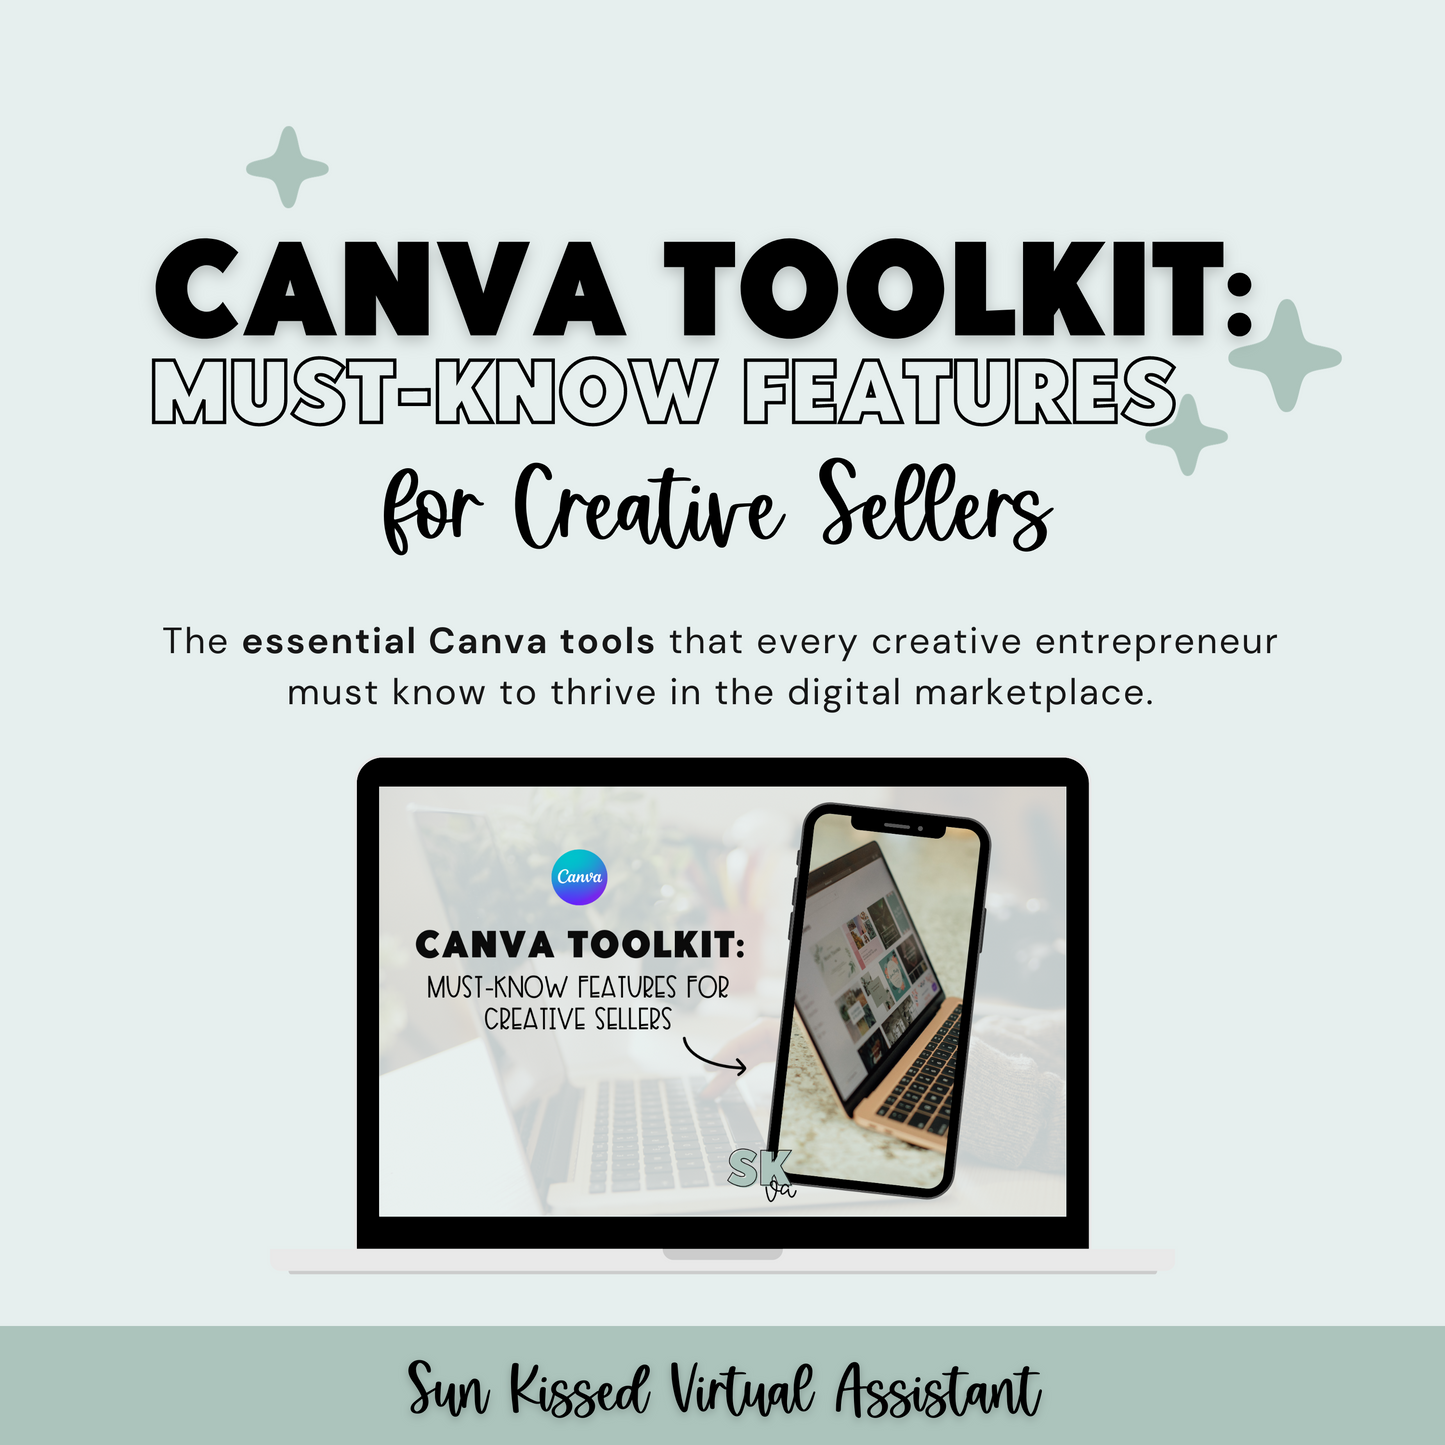 Canva ToolKit: Must-Know Features for Creative Sellers